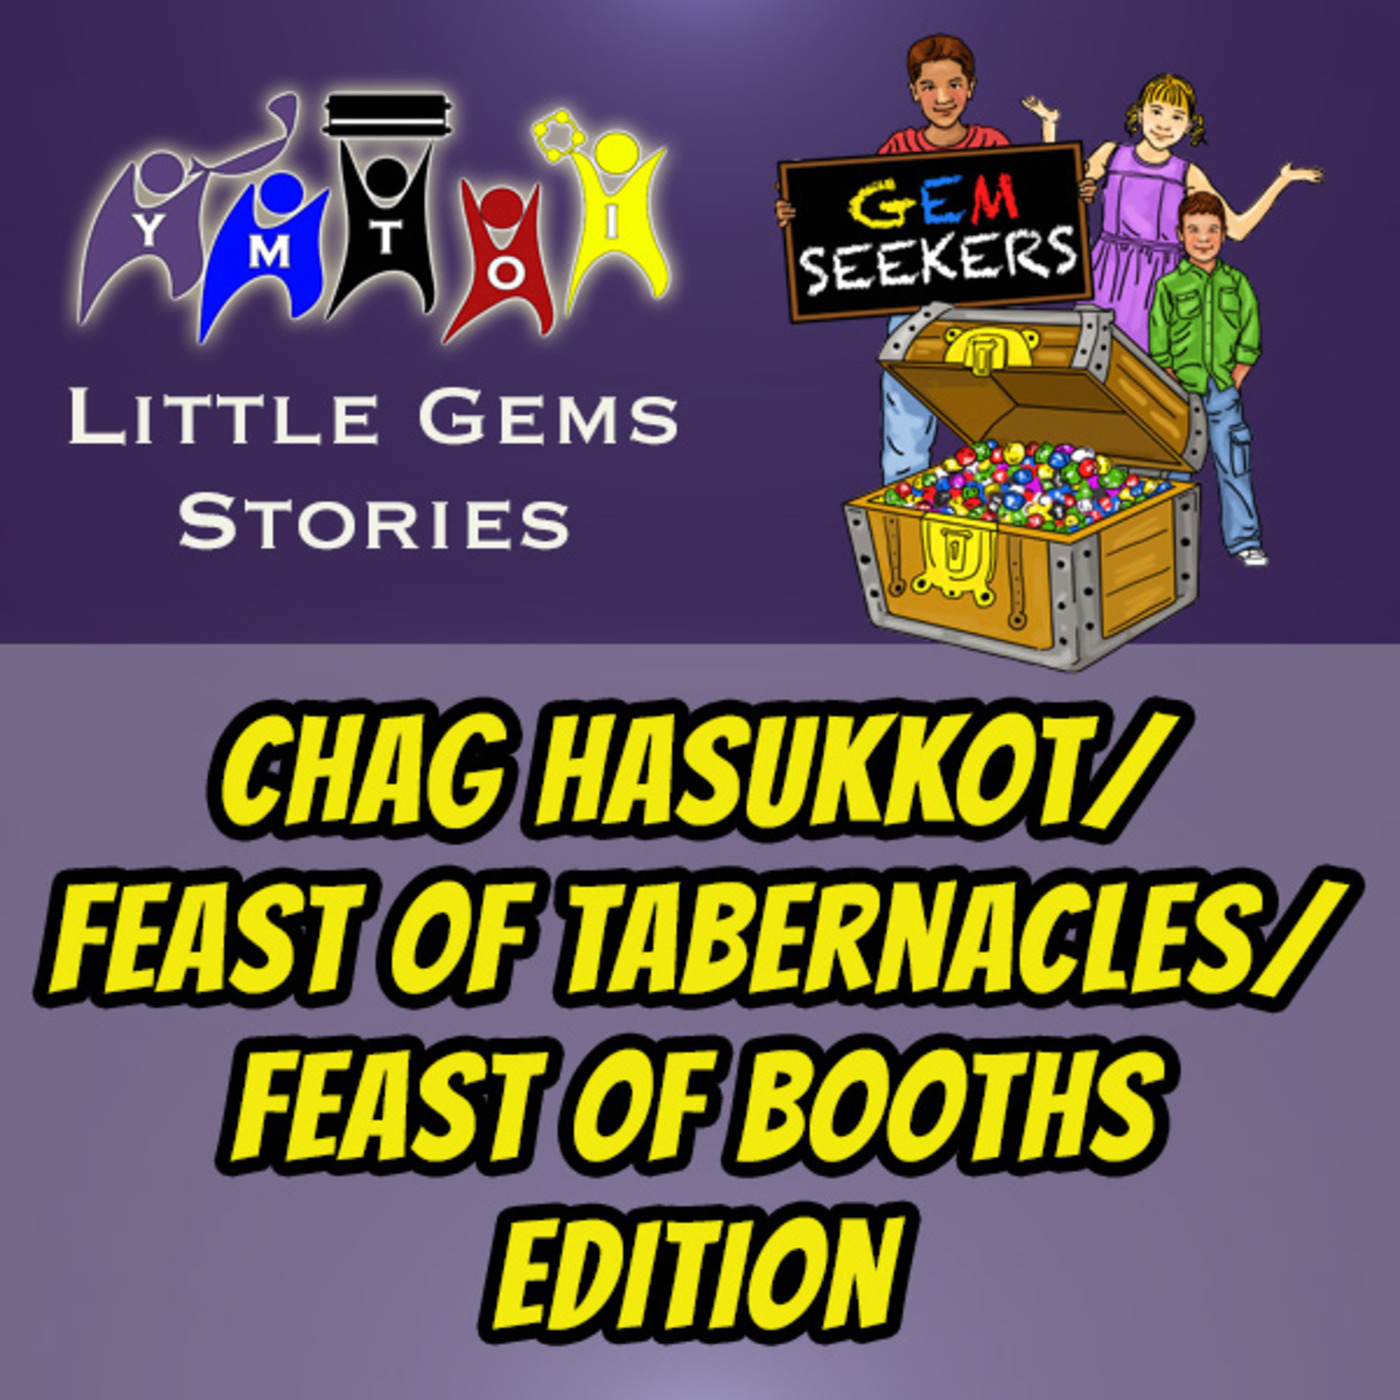 Episode 780: YMTOI Little Gems Story | Chag HaSukkot/Feast of Tabernacles/Feast of Booths Edition